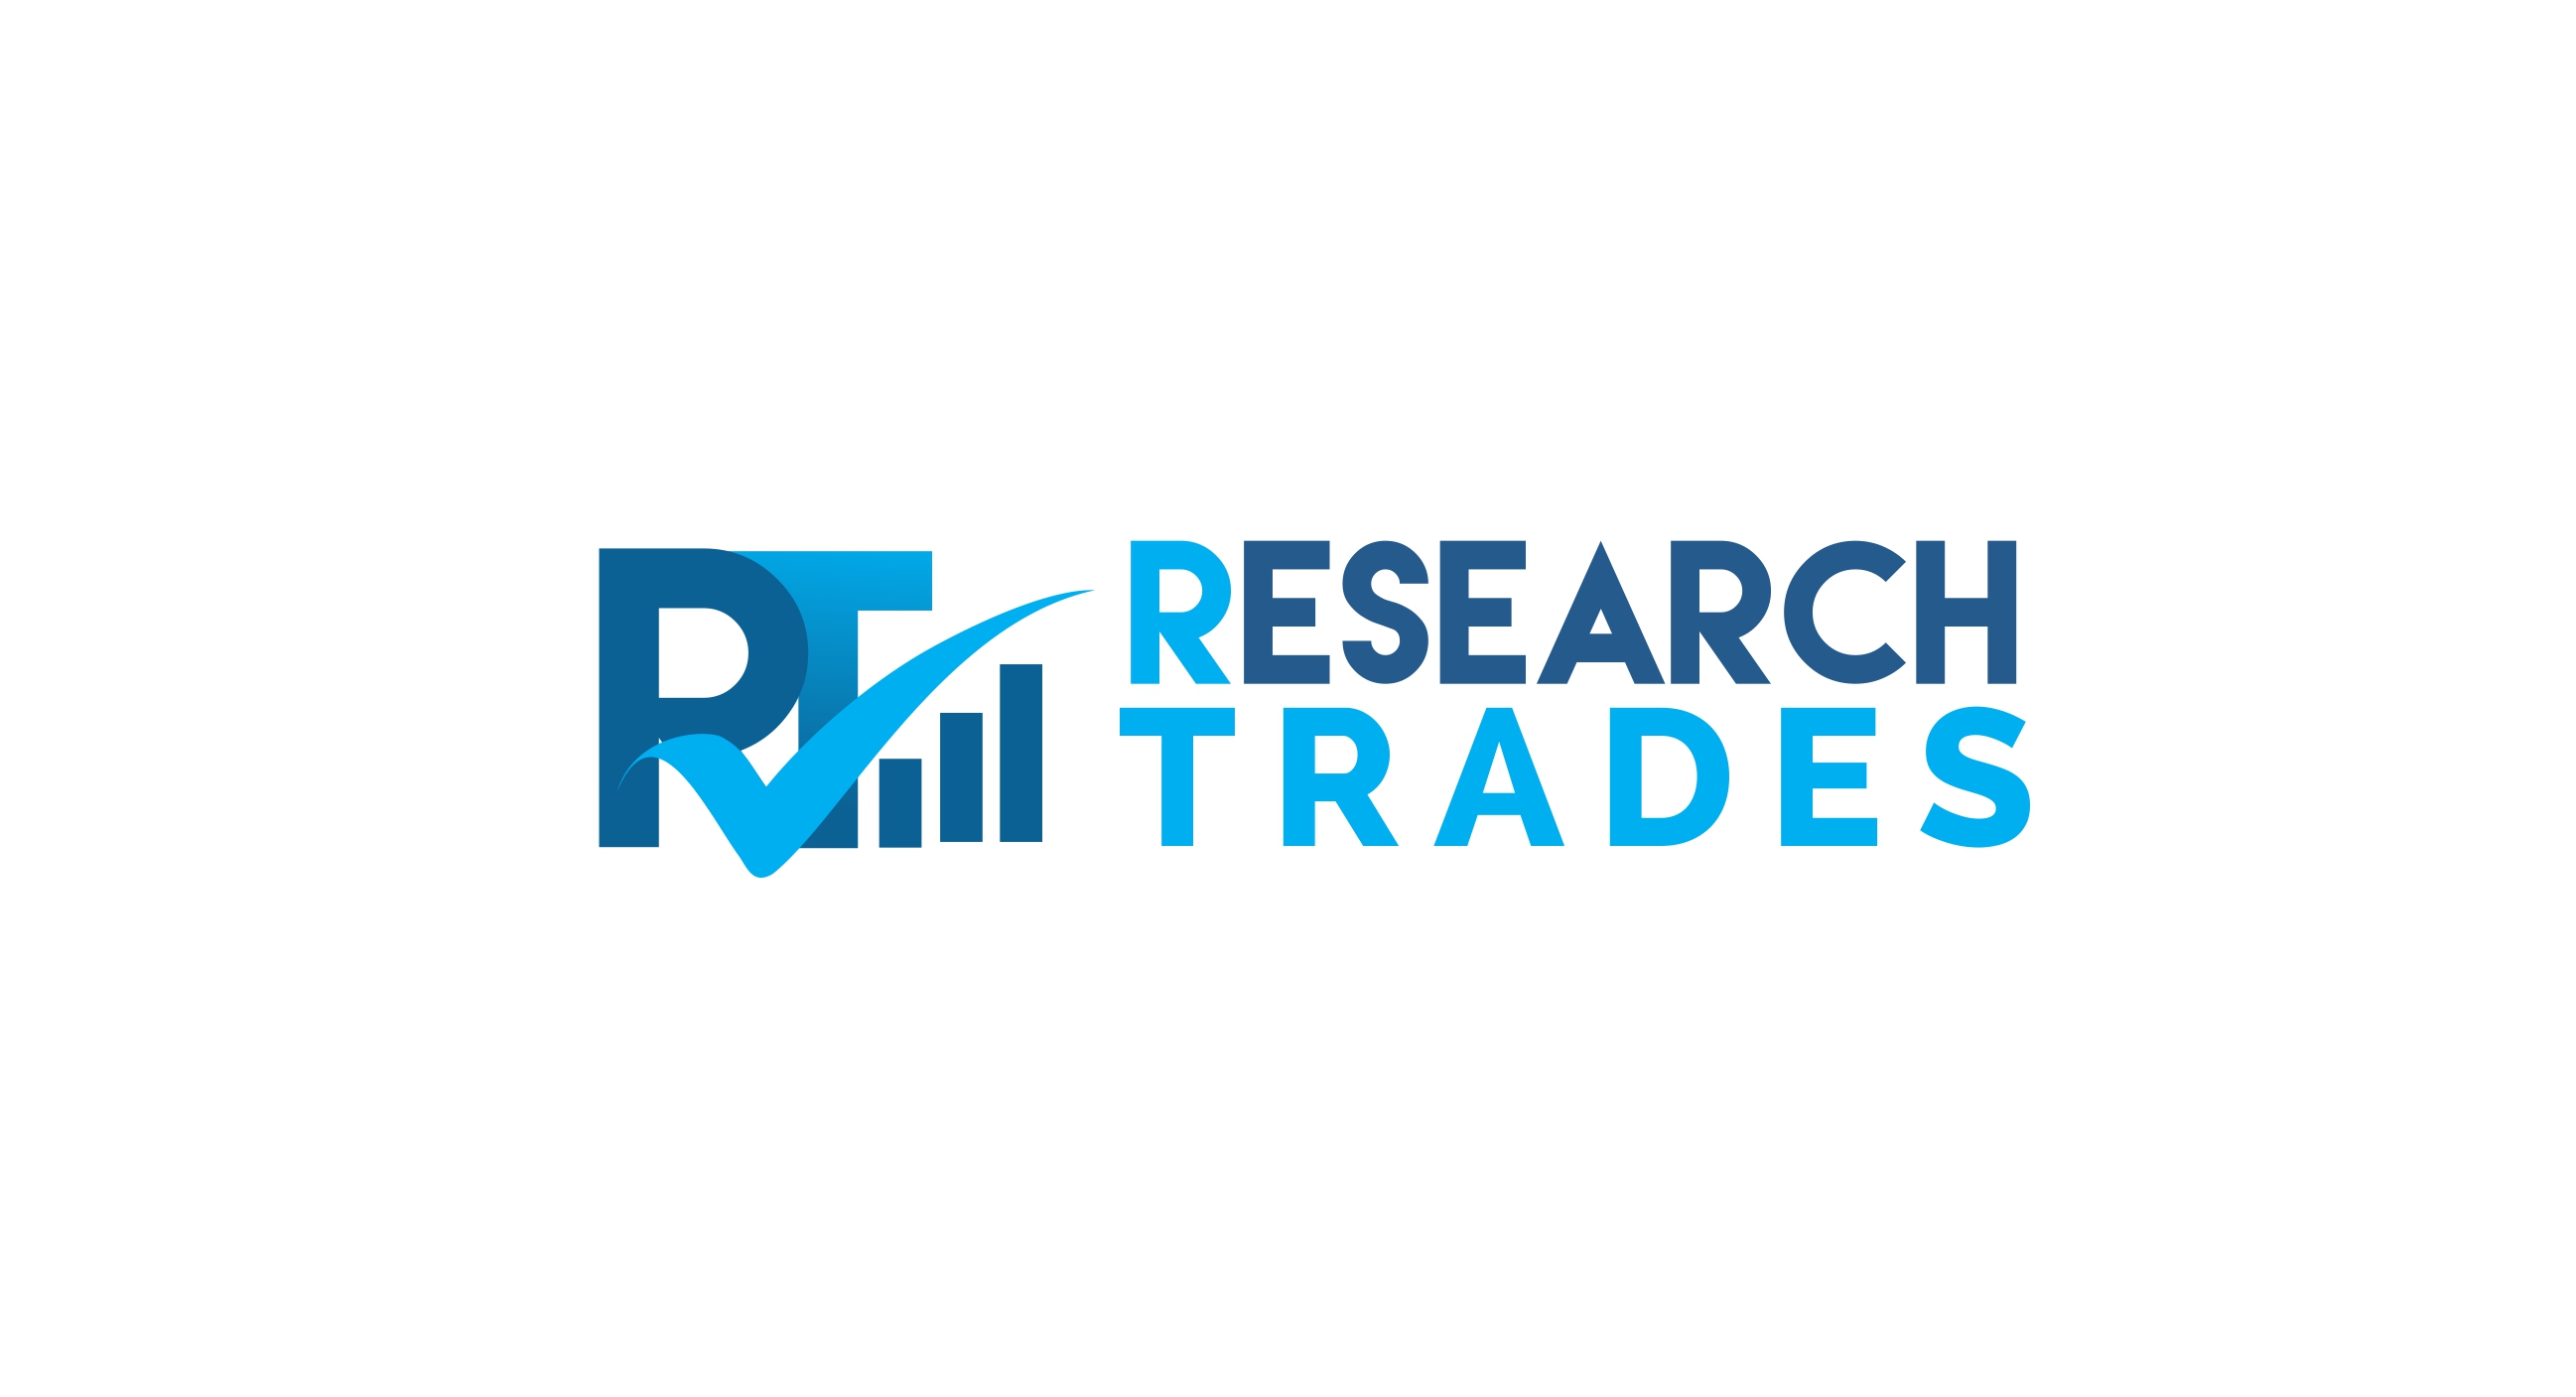 United States Weathertight Doors Market Share By Top Key Players Like Bofor Marine Products, Libra-Plast AS, LUBMOR, Manly Marine, Meblomor, Metalstyle Srl and Others 2017 - 2022